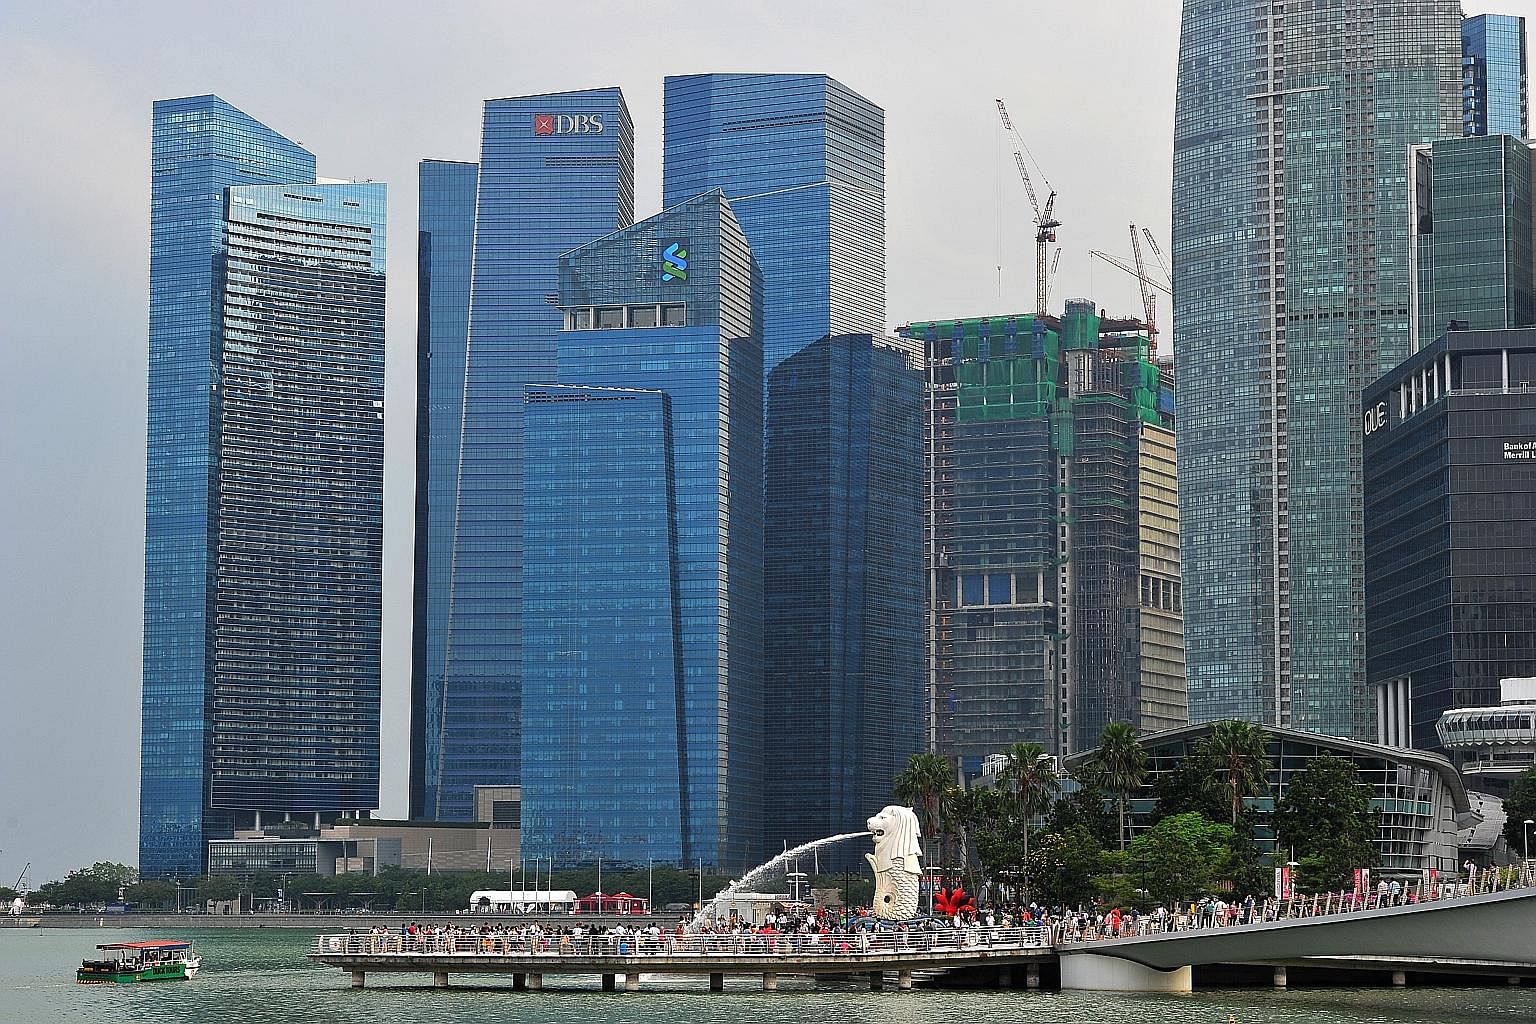 The global economic landscape is changing rapidly, warned Mr Heng, and major economies like China and India are restructuring. Singapore has but a narrow window of opportunity to transform itself.